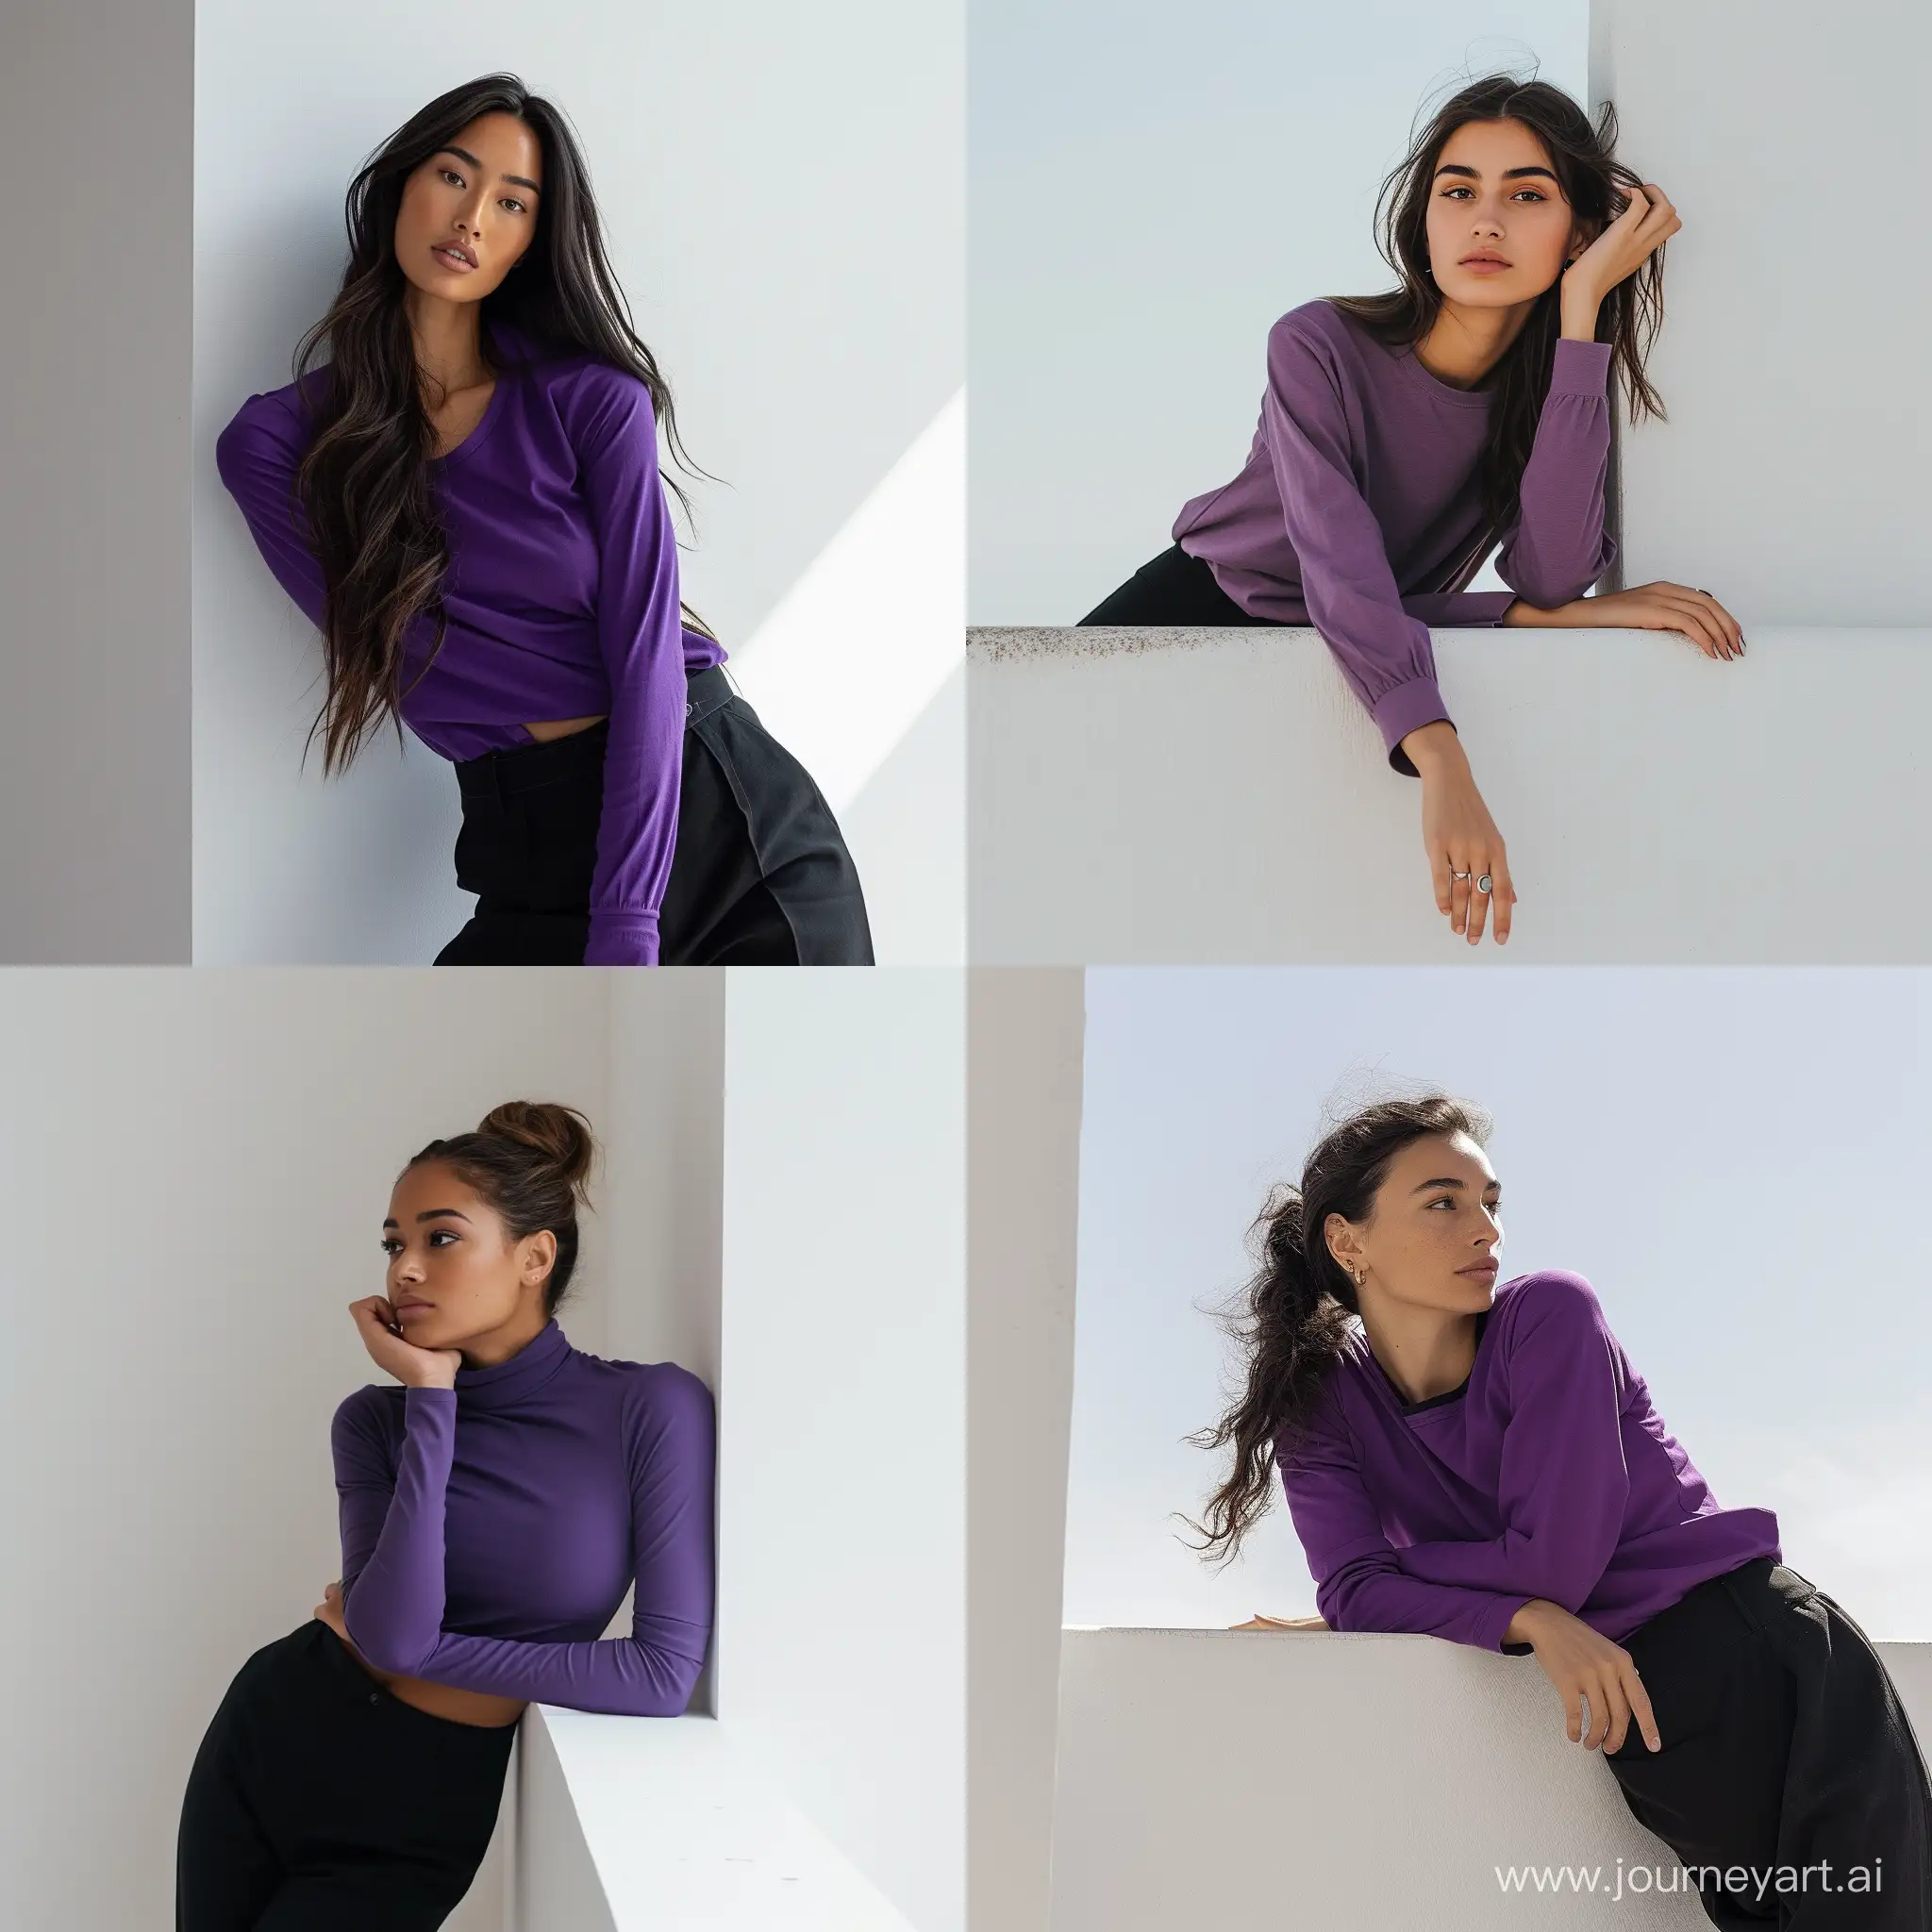 Stylish-Women-Leaning-on-White-Wall-in-Purple-Long-Sleeve-Shirt-and-Black-Pants